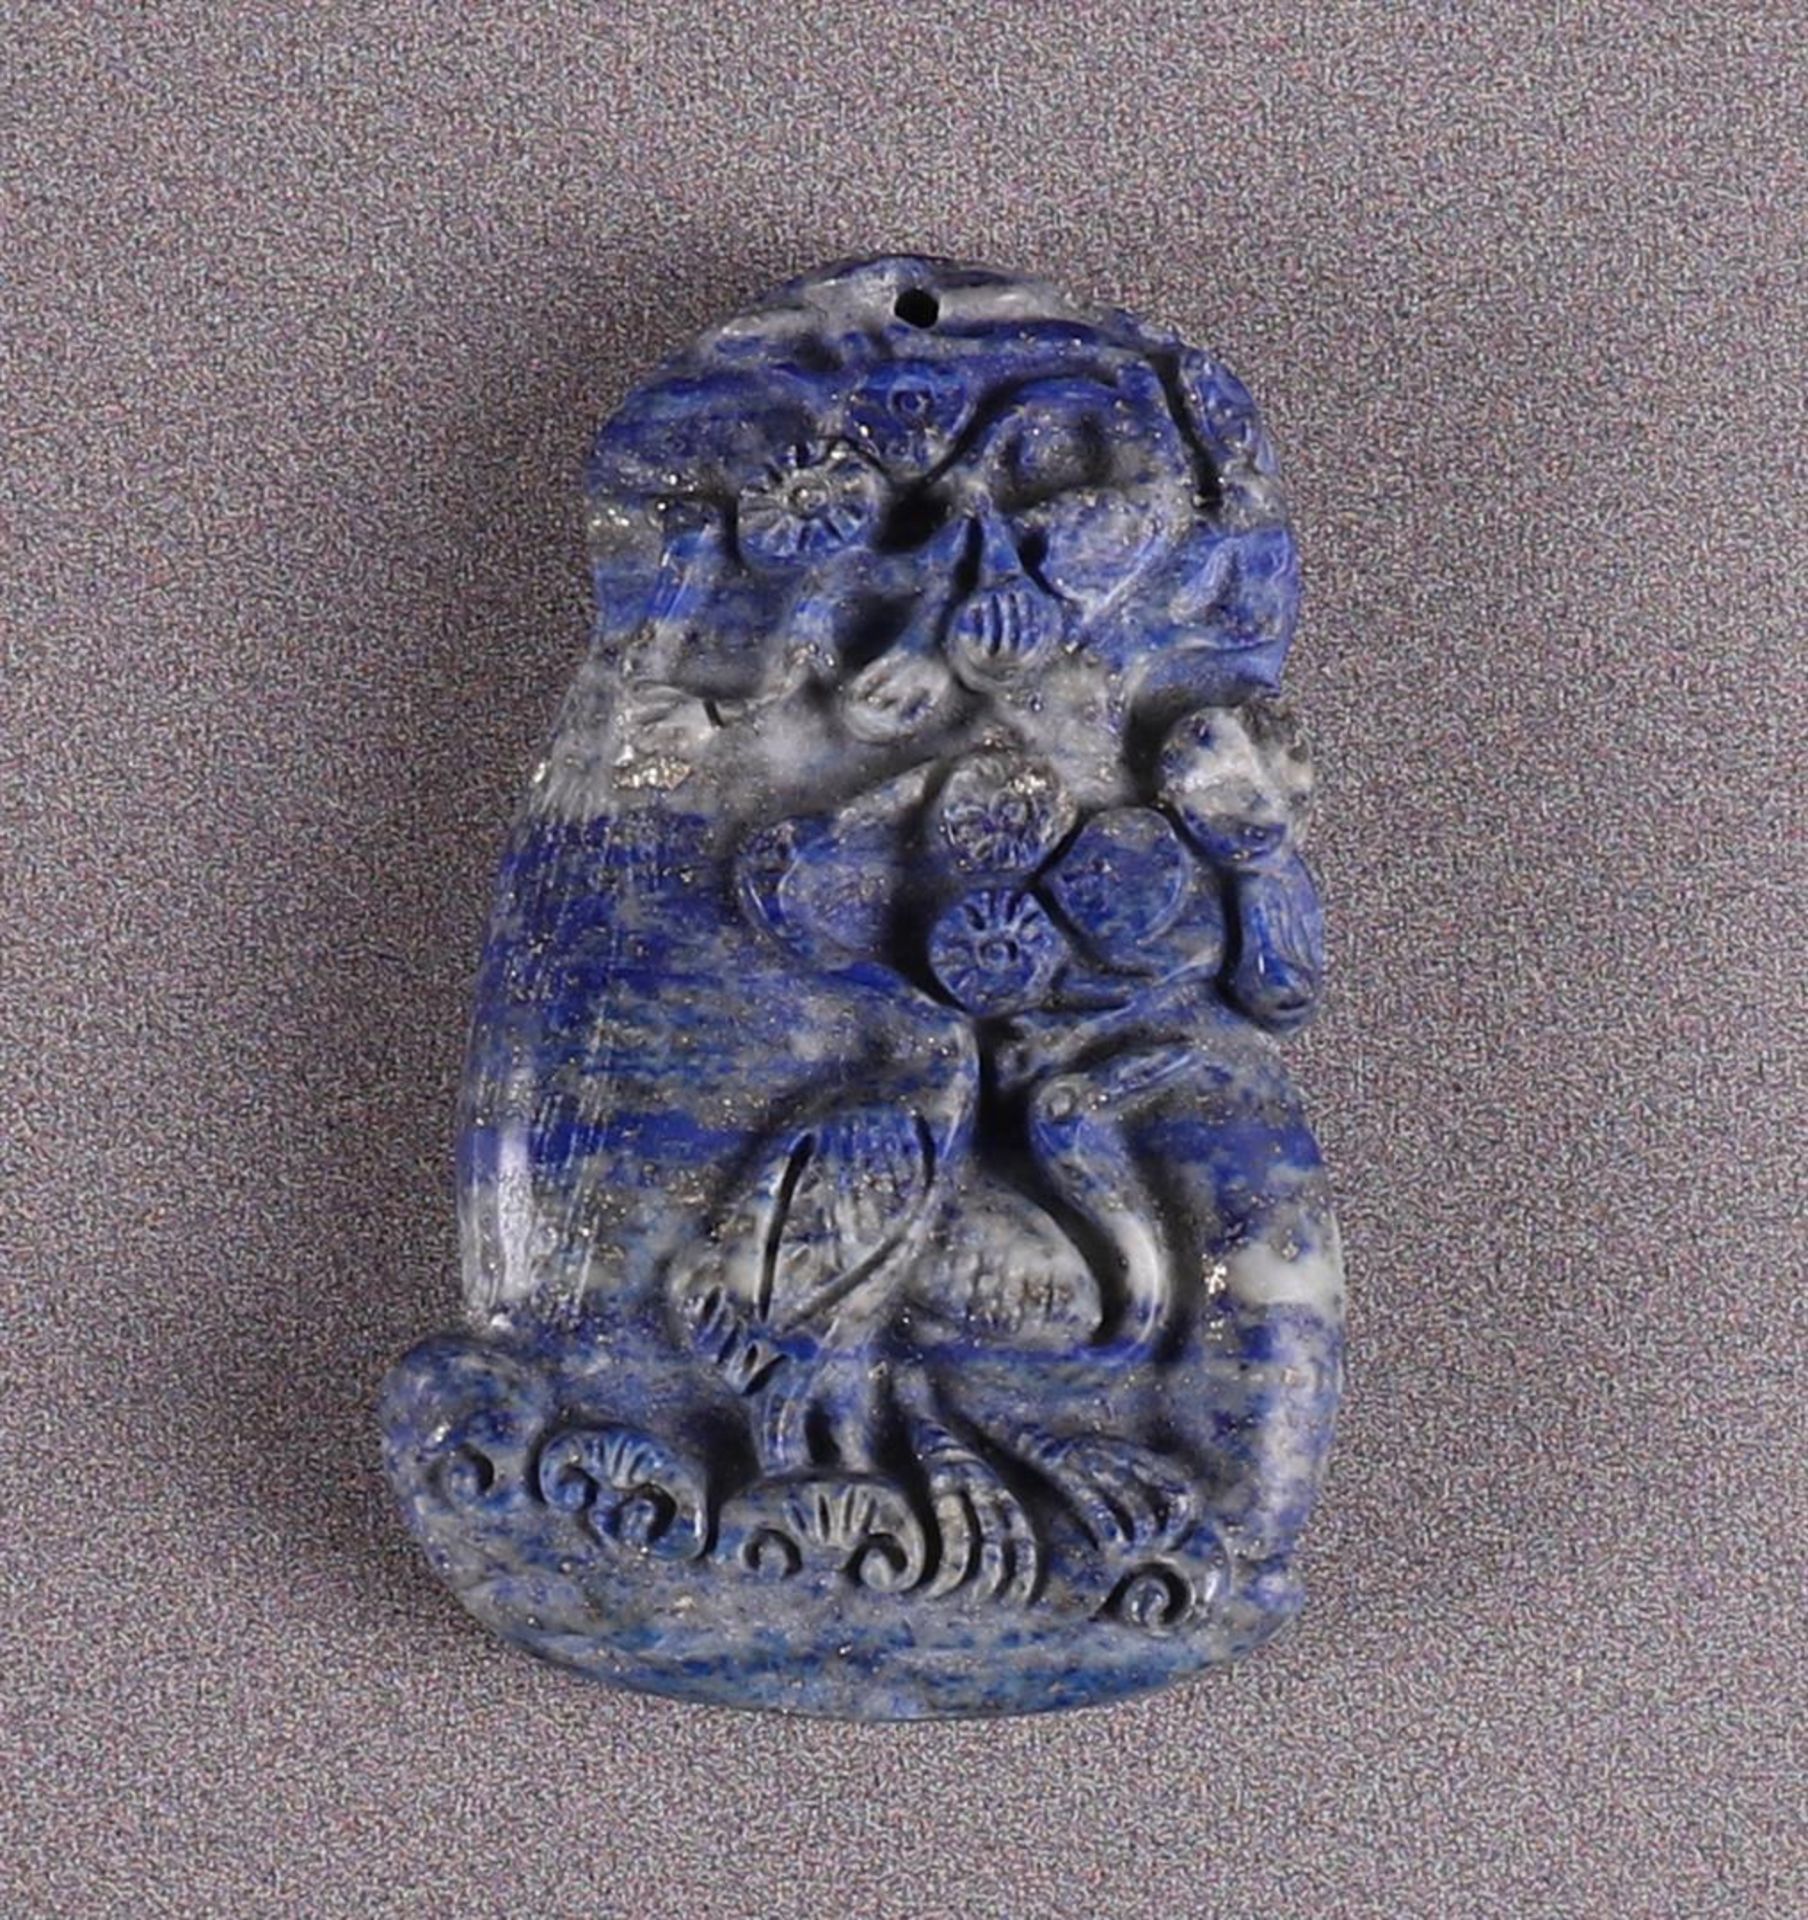 A lapis lazuli pendant with a relief depiction of a crane near prunus, China